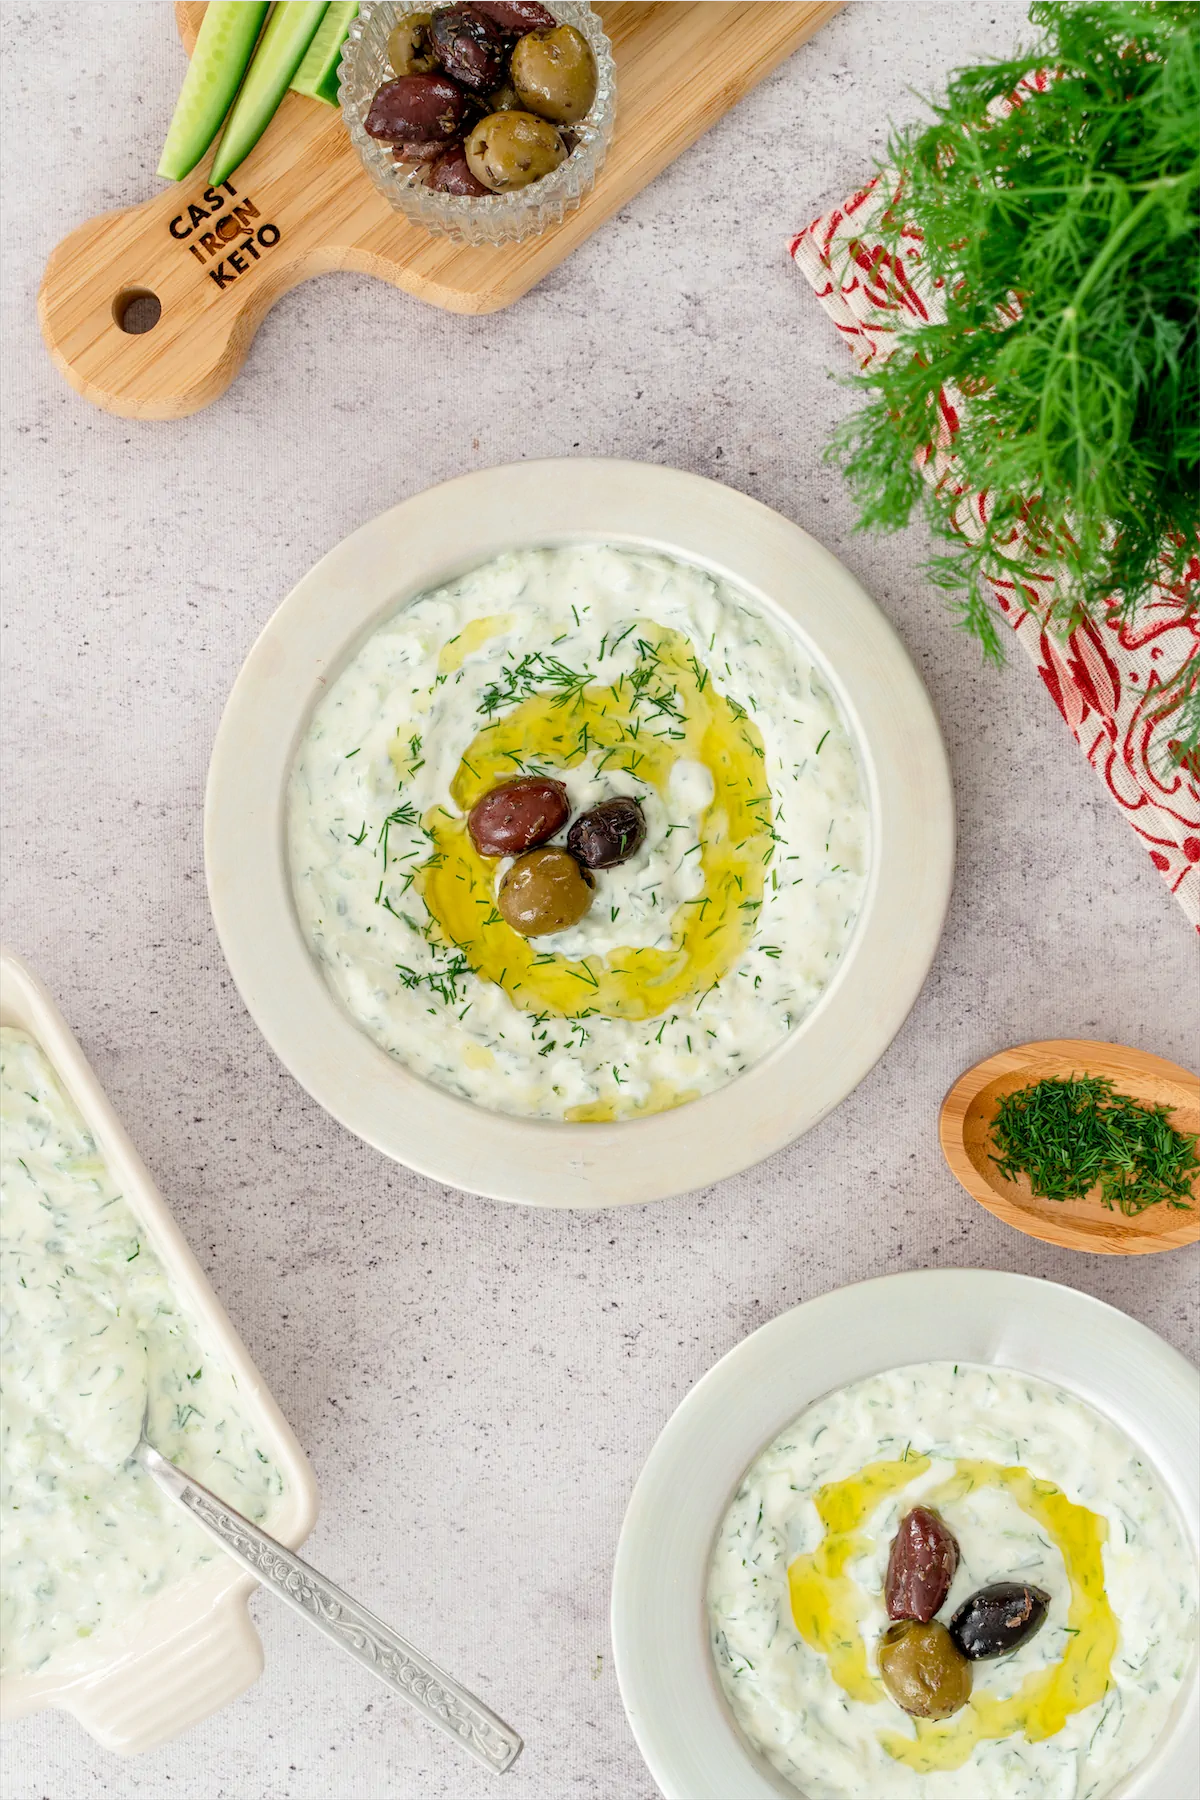 A serving of homemade keto tzatziki featuring olives, beautifully plated on a white surface.